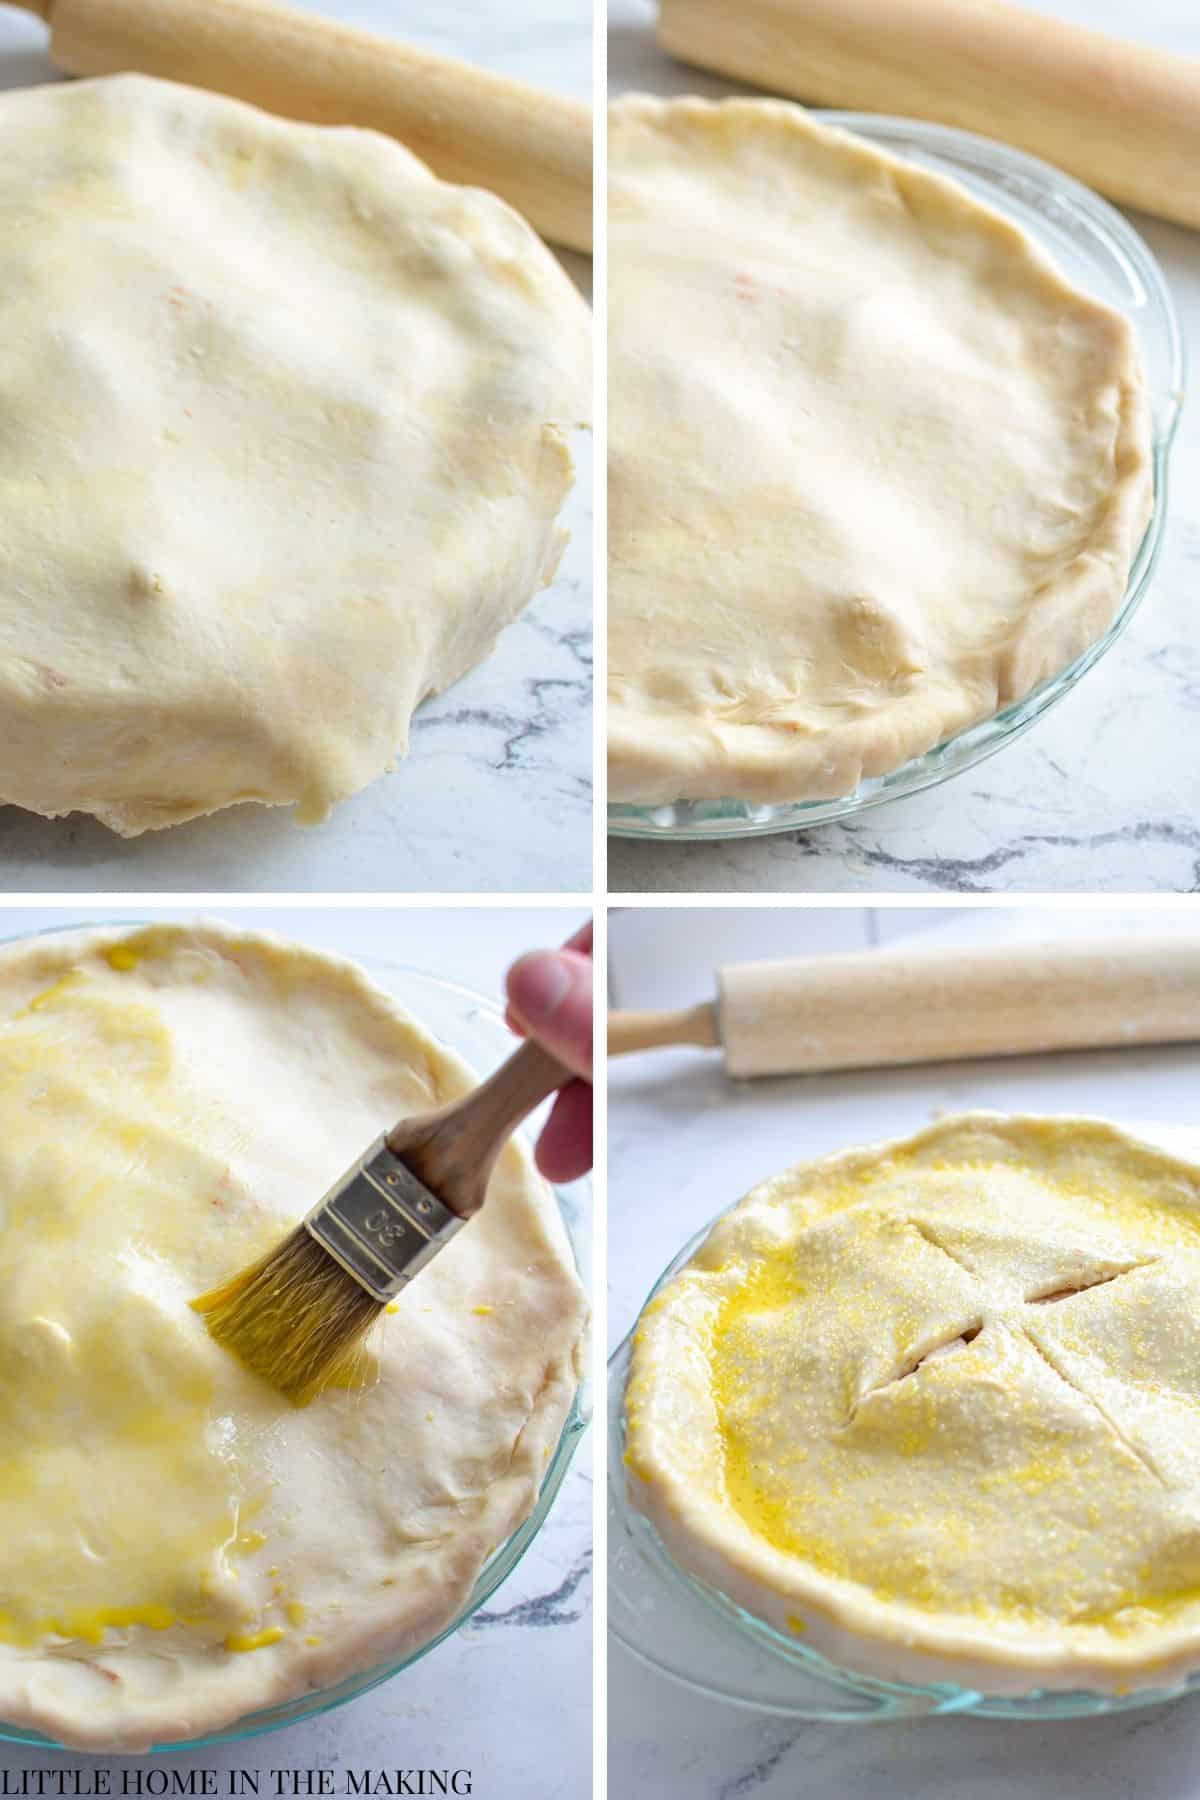 Topping a pie dish with a top crust, and brushing with an egg wash.